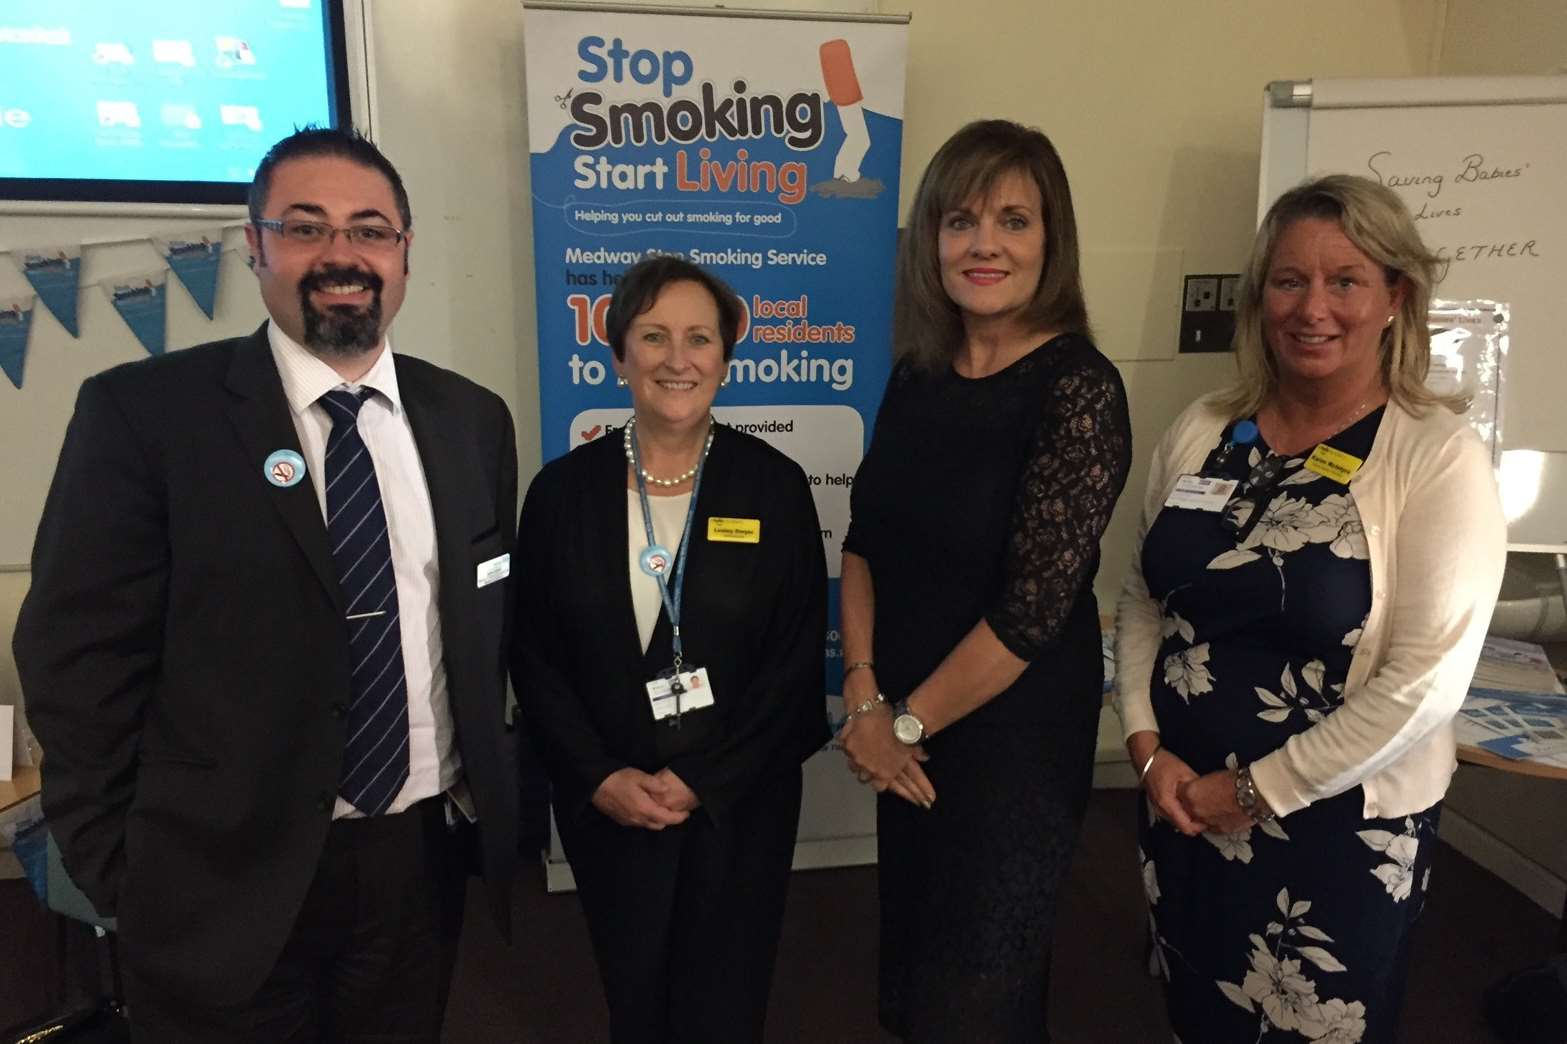 Saving Babies Lives - James Lowell, hospital Chief Executive Lesley Dwyer, Lisa Fendall from BBC Three's Misbehaving Mums, and Karen McIntyre